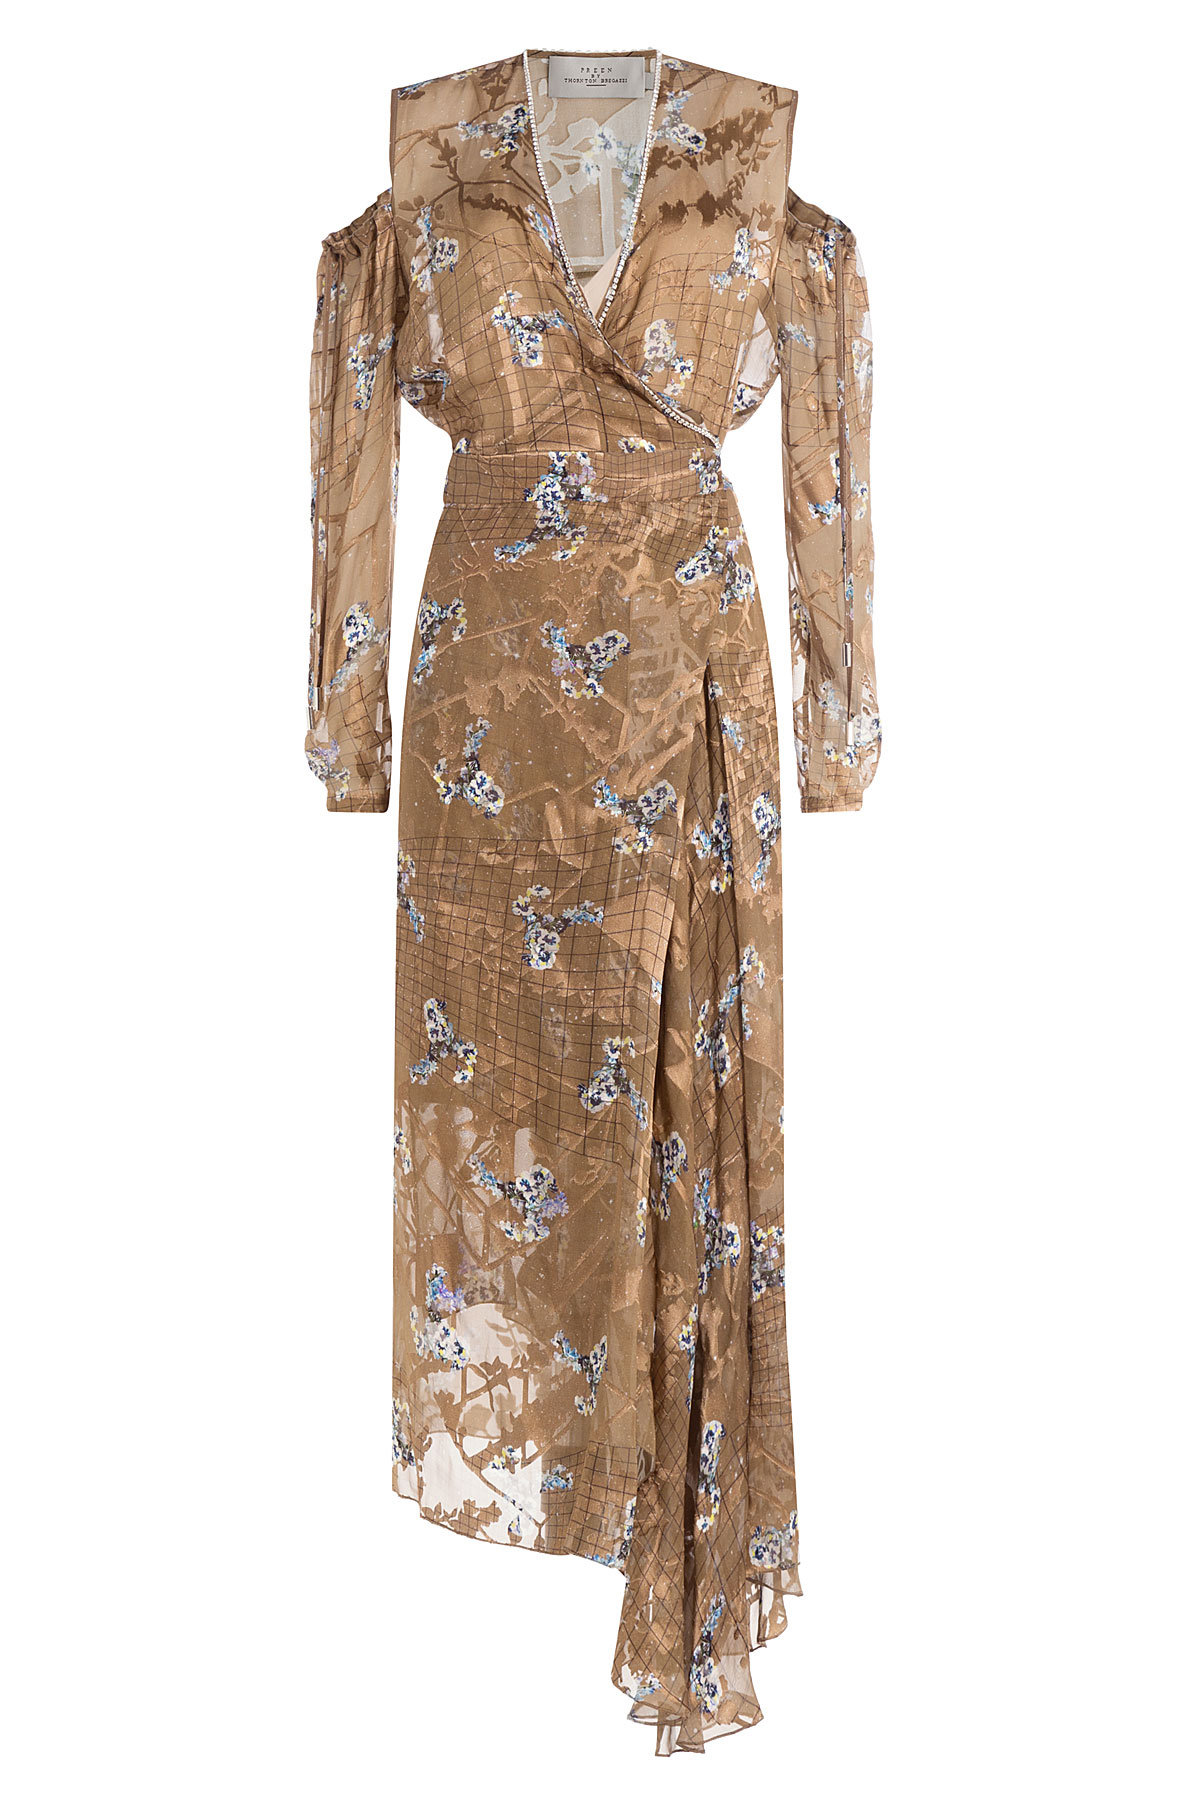 Preen - Printed Dress with Cut-Out Shoulders and Embellishment